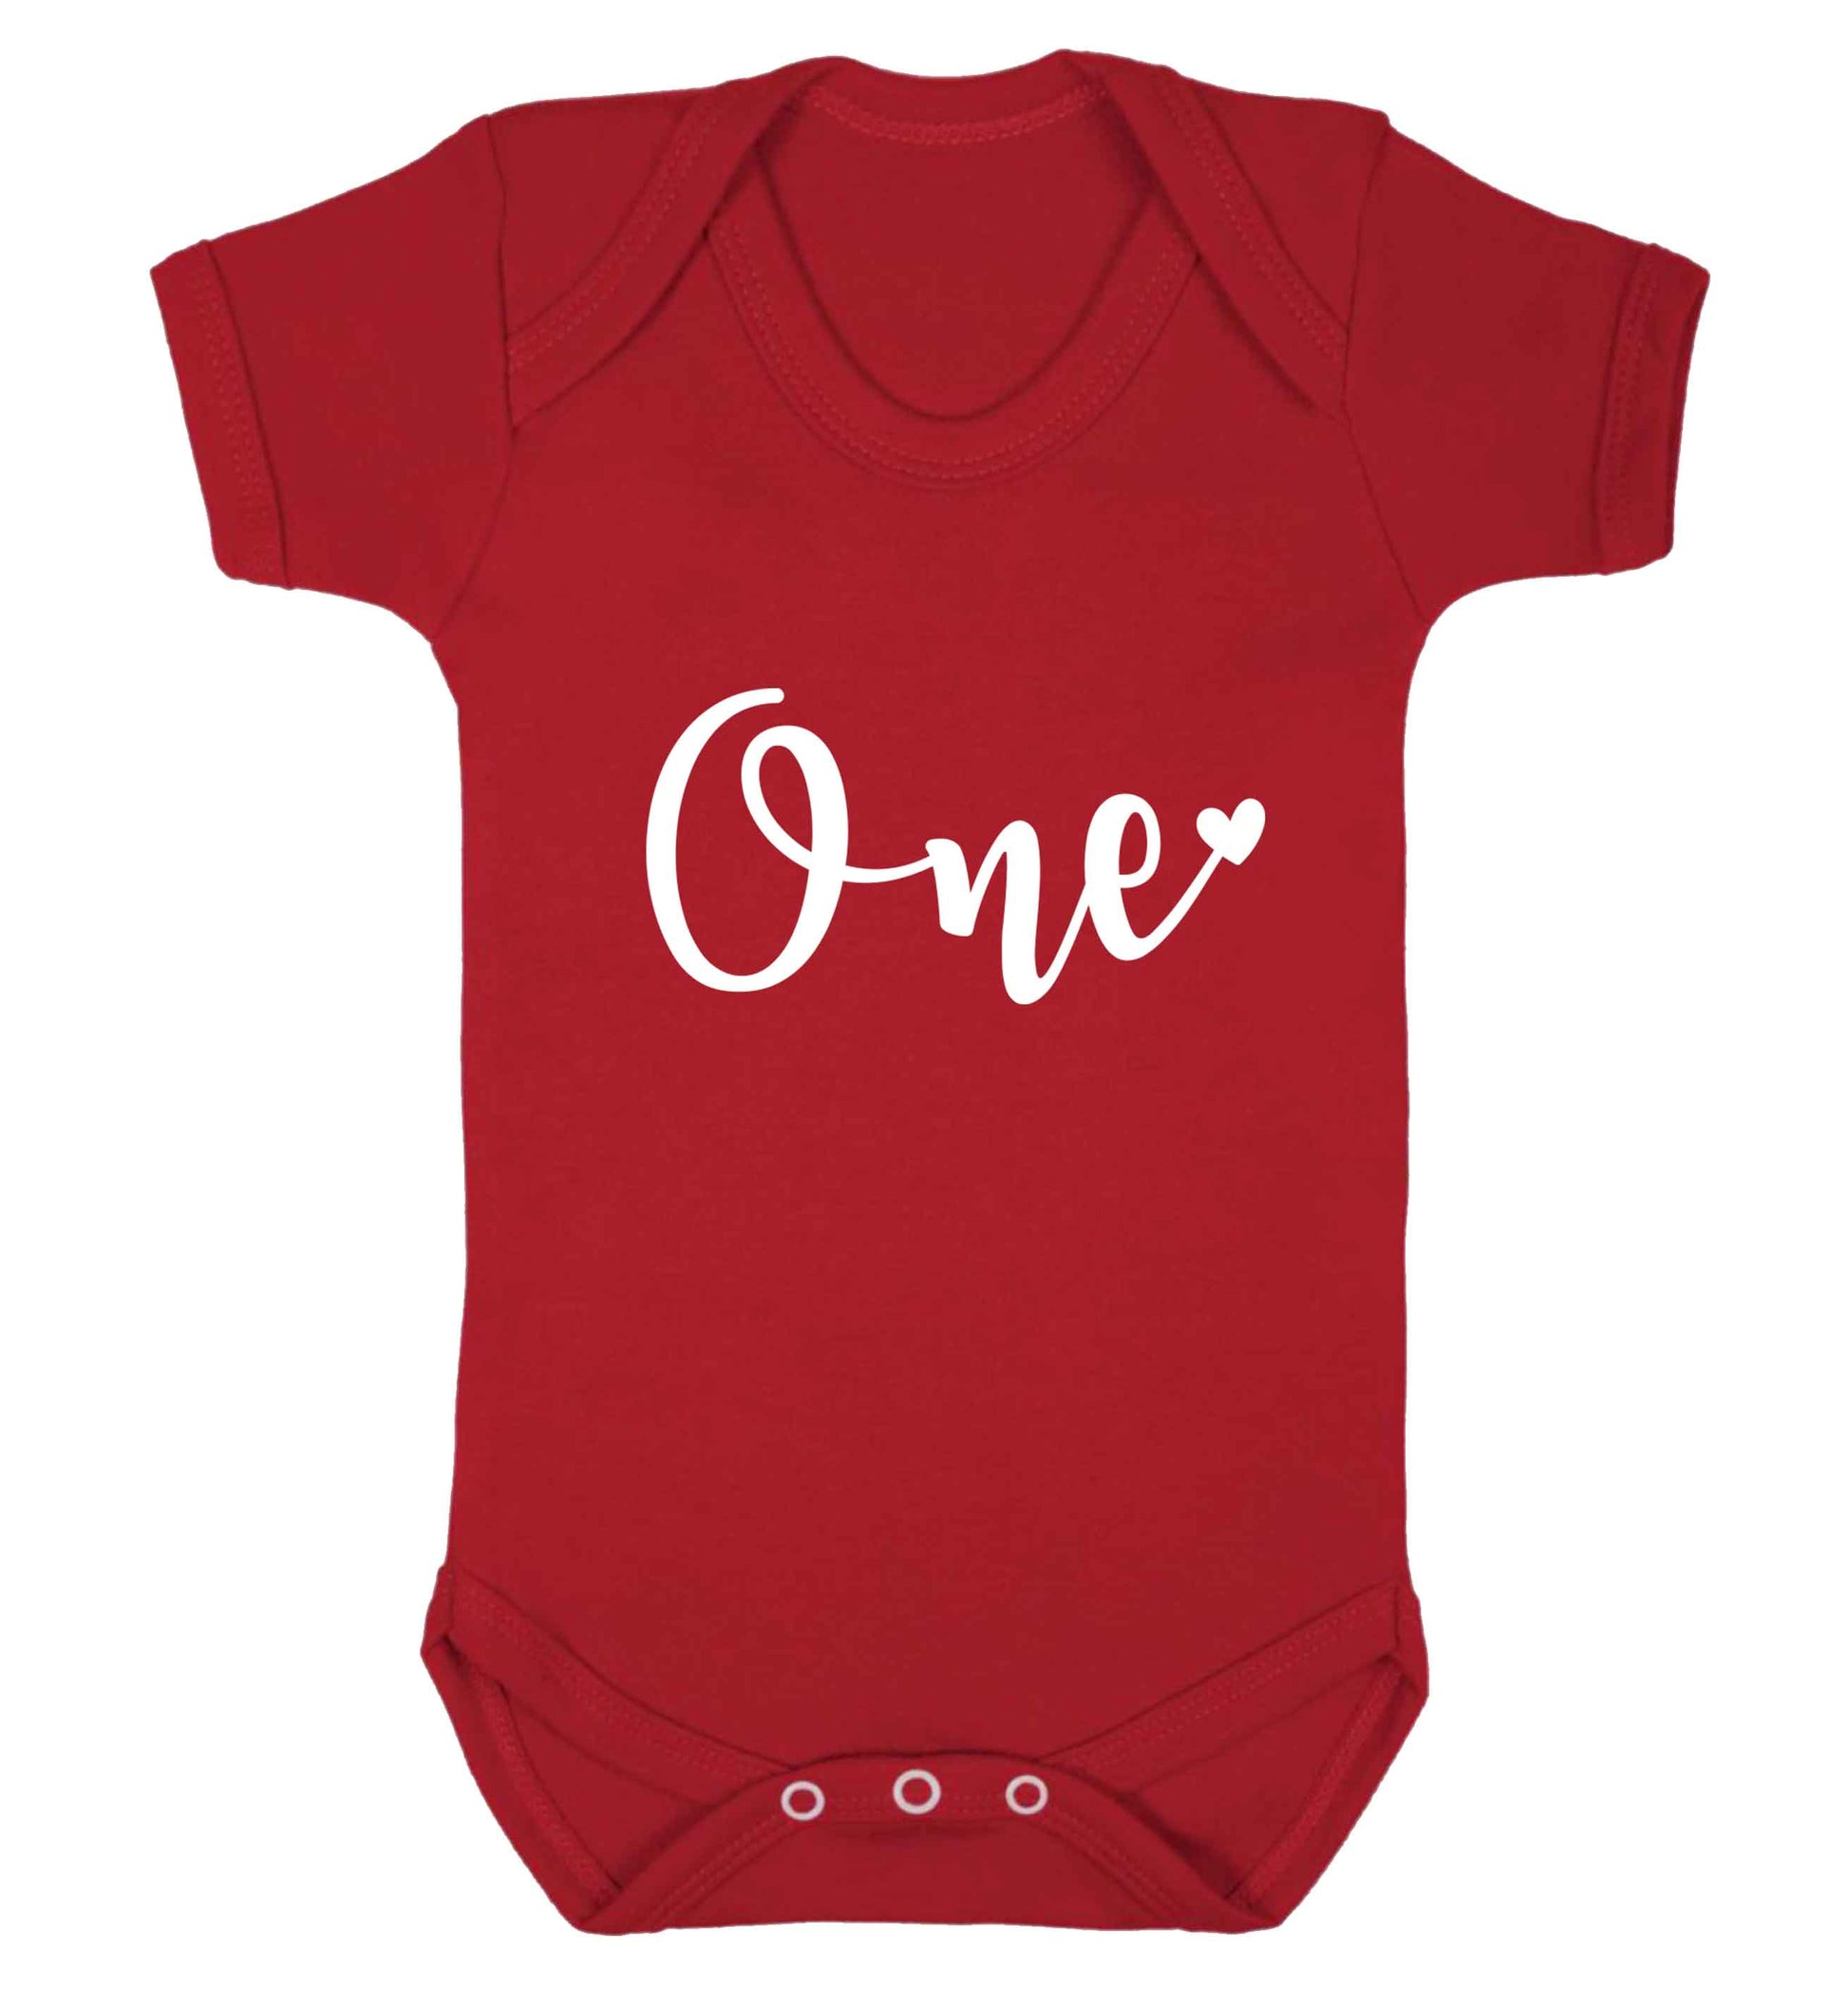 One baby vest red 18-24 months